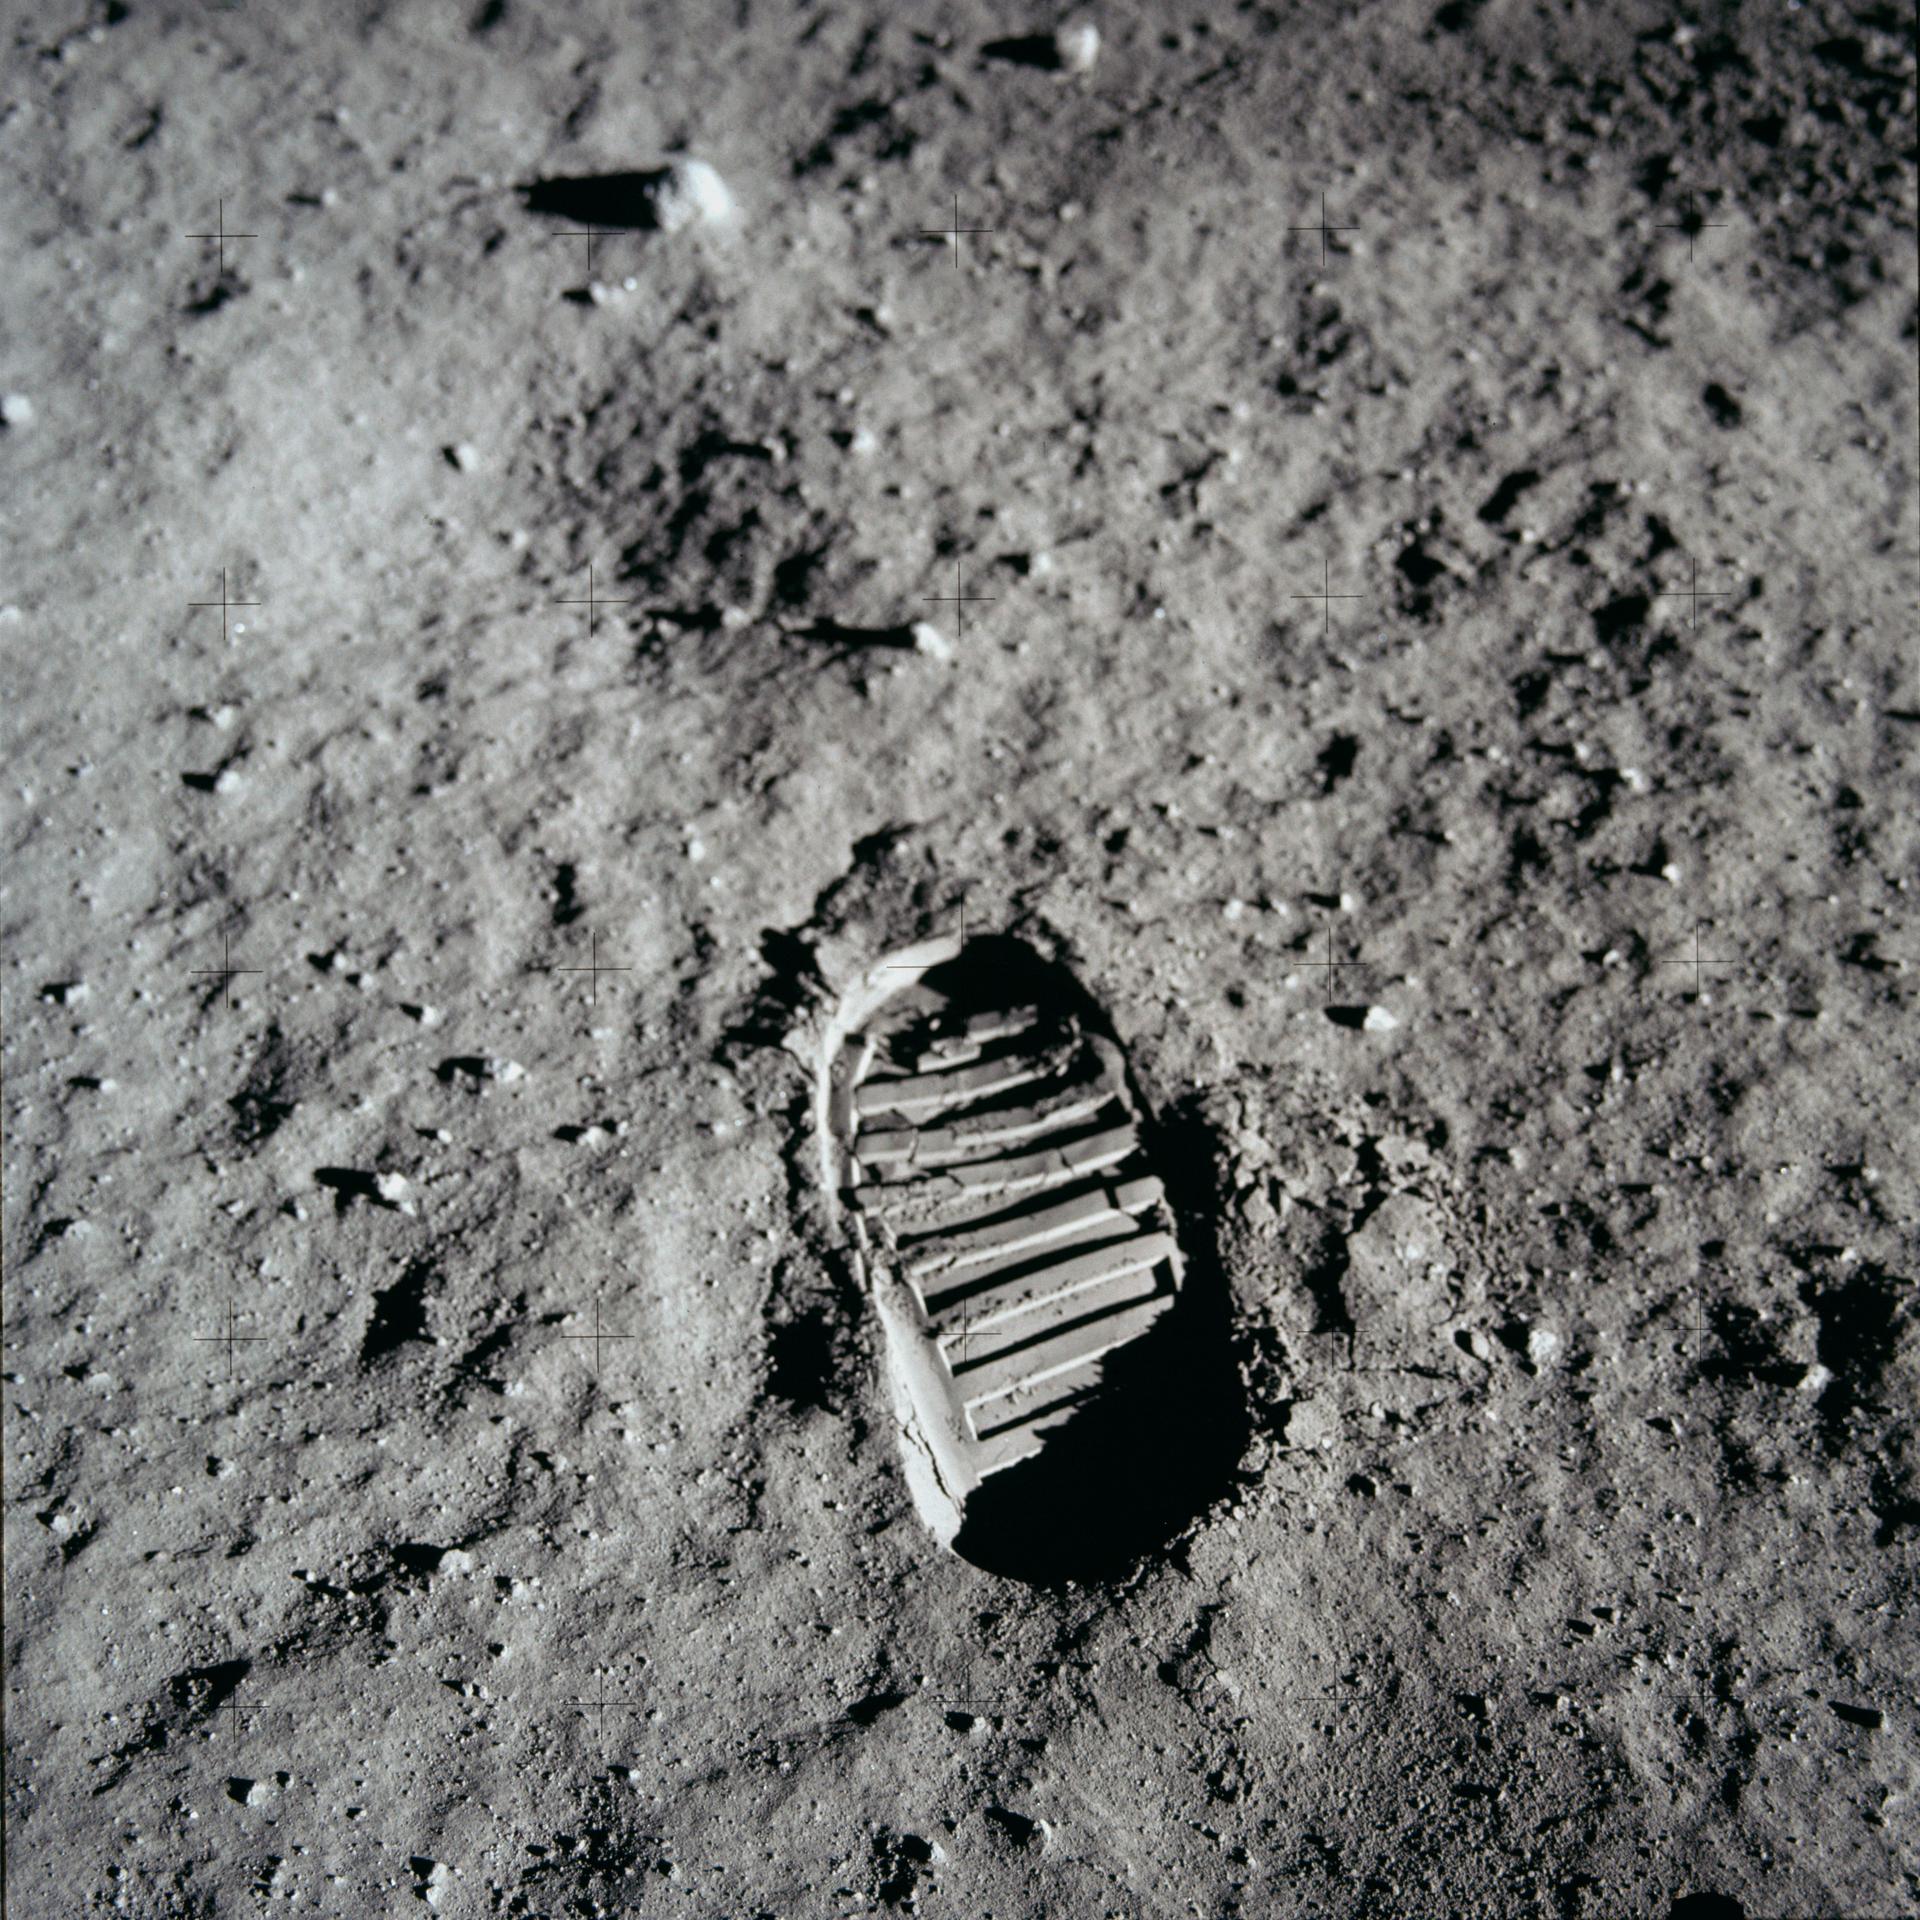 A close-up view of an astronaut's boot print in the lunar soil, photographed with a lunar surface camera during the Apollo 11 extravehicular activity (EVA) on the Moon.